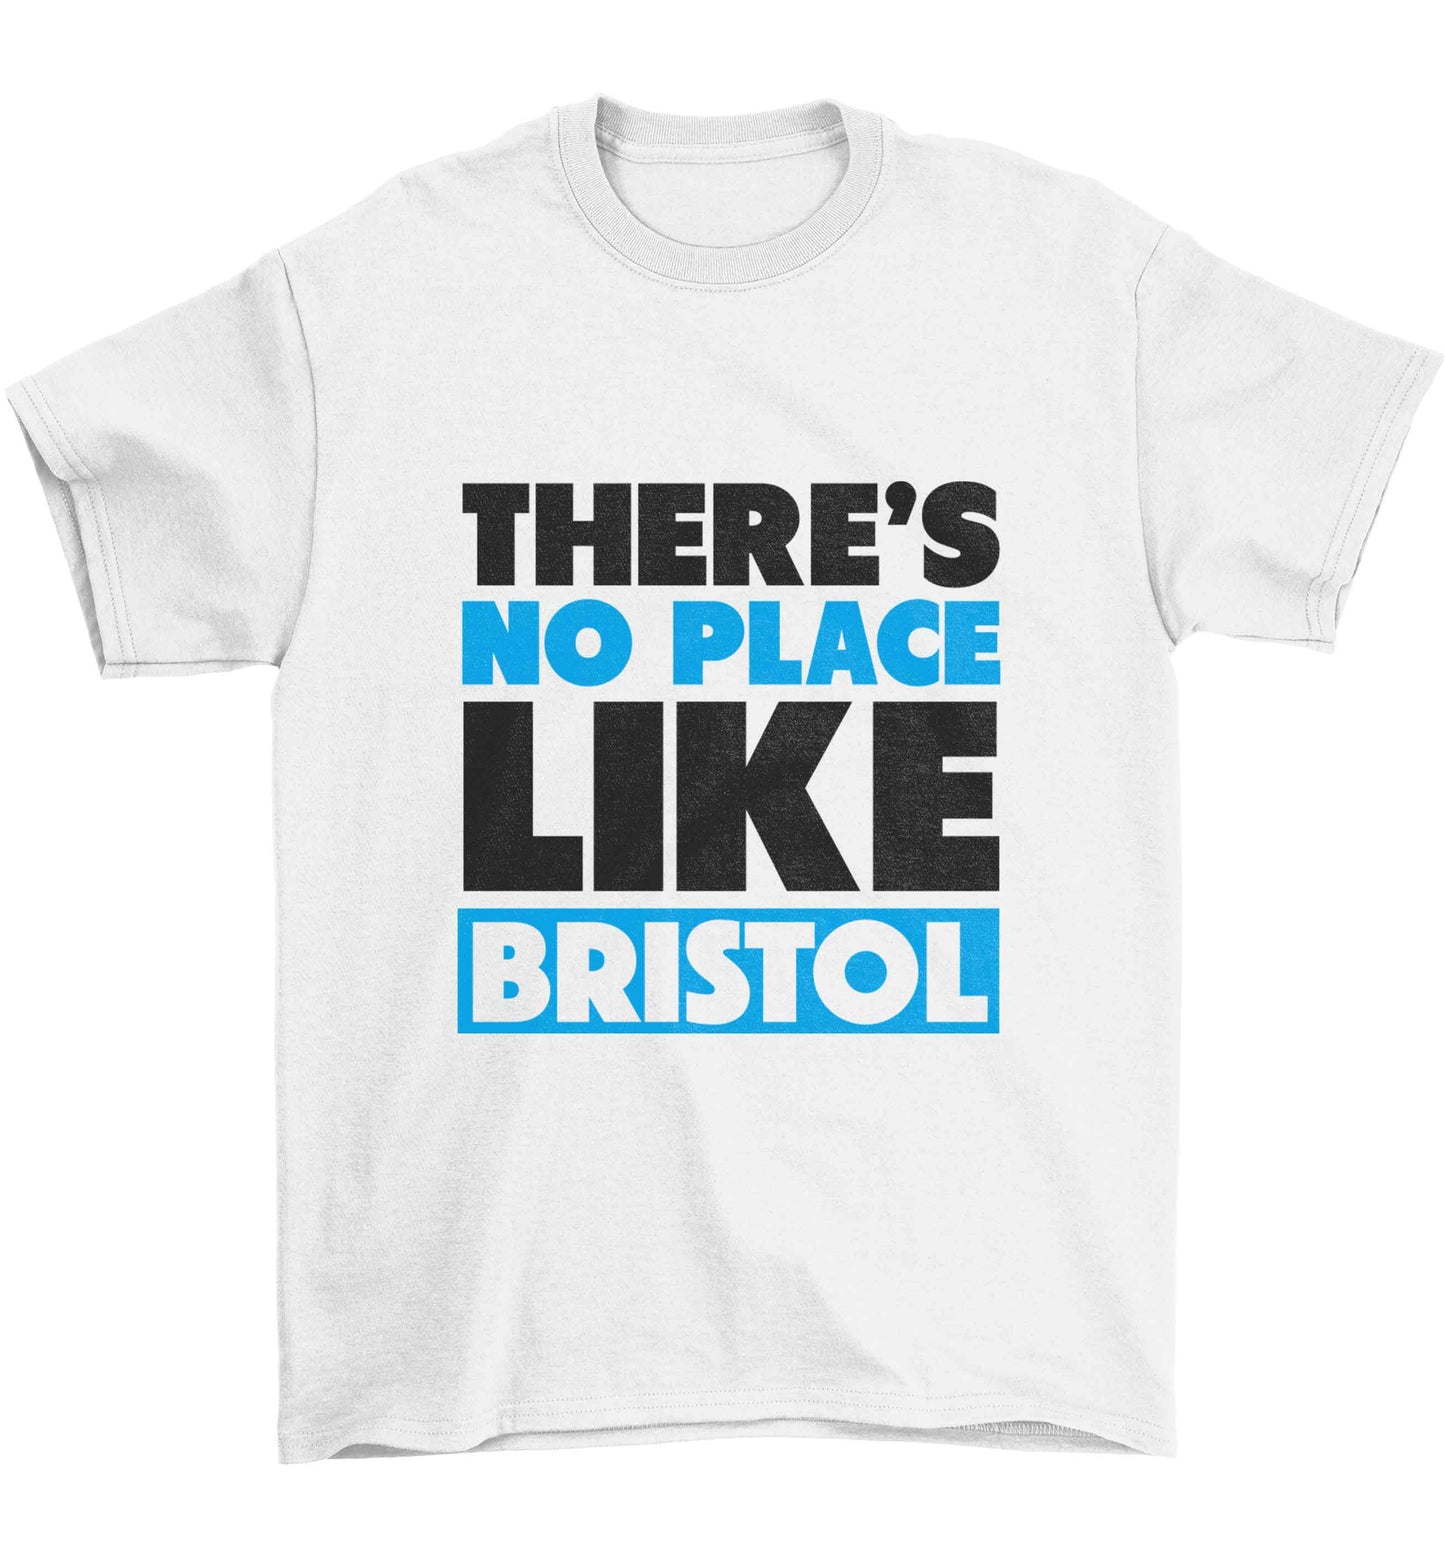 There's no place like Bristol Children's white Tshirt 12-13 Years